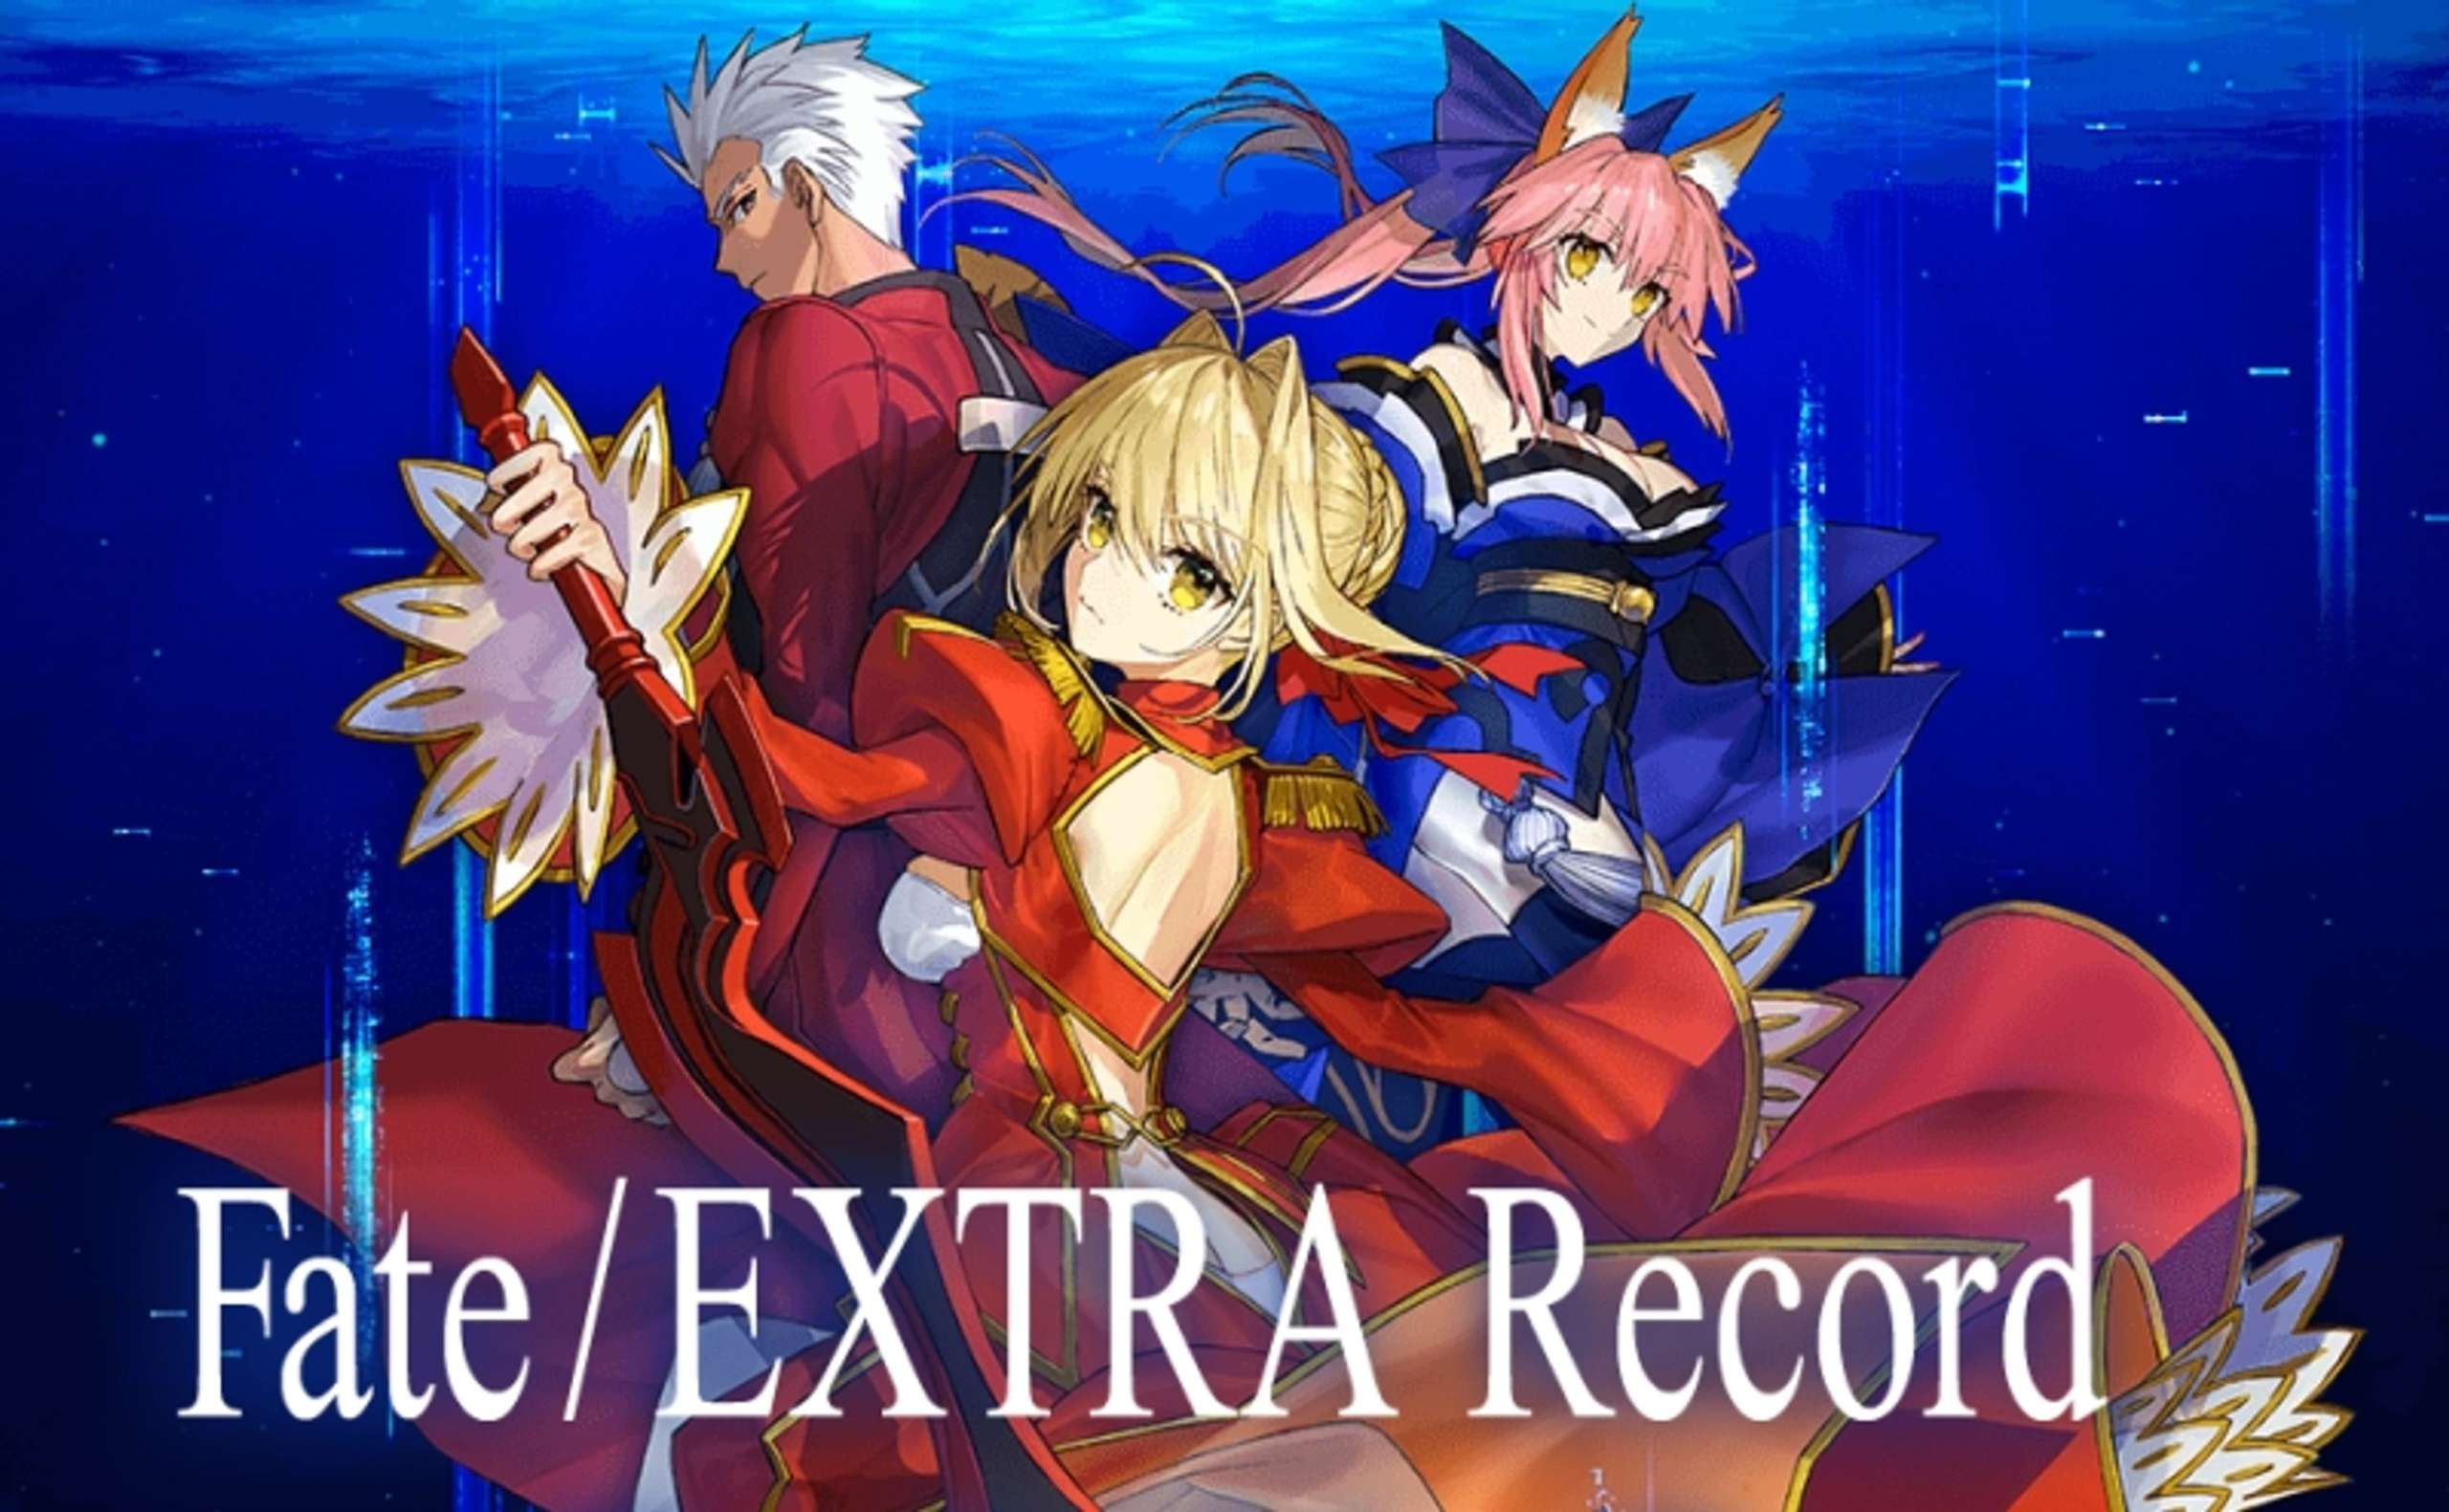 The Fate/EXTRA Record Remake Trailer Features Well-Known Characters